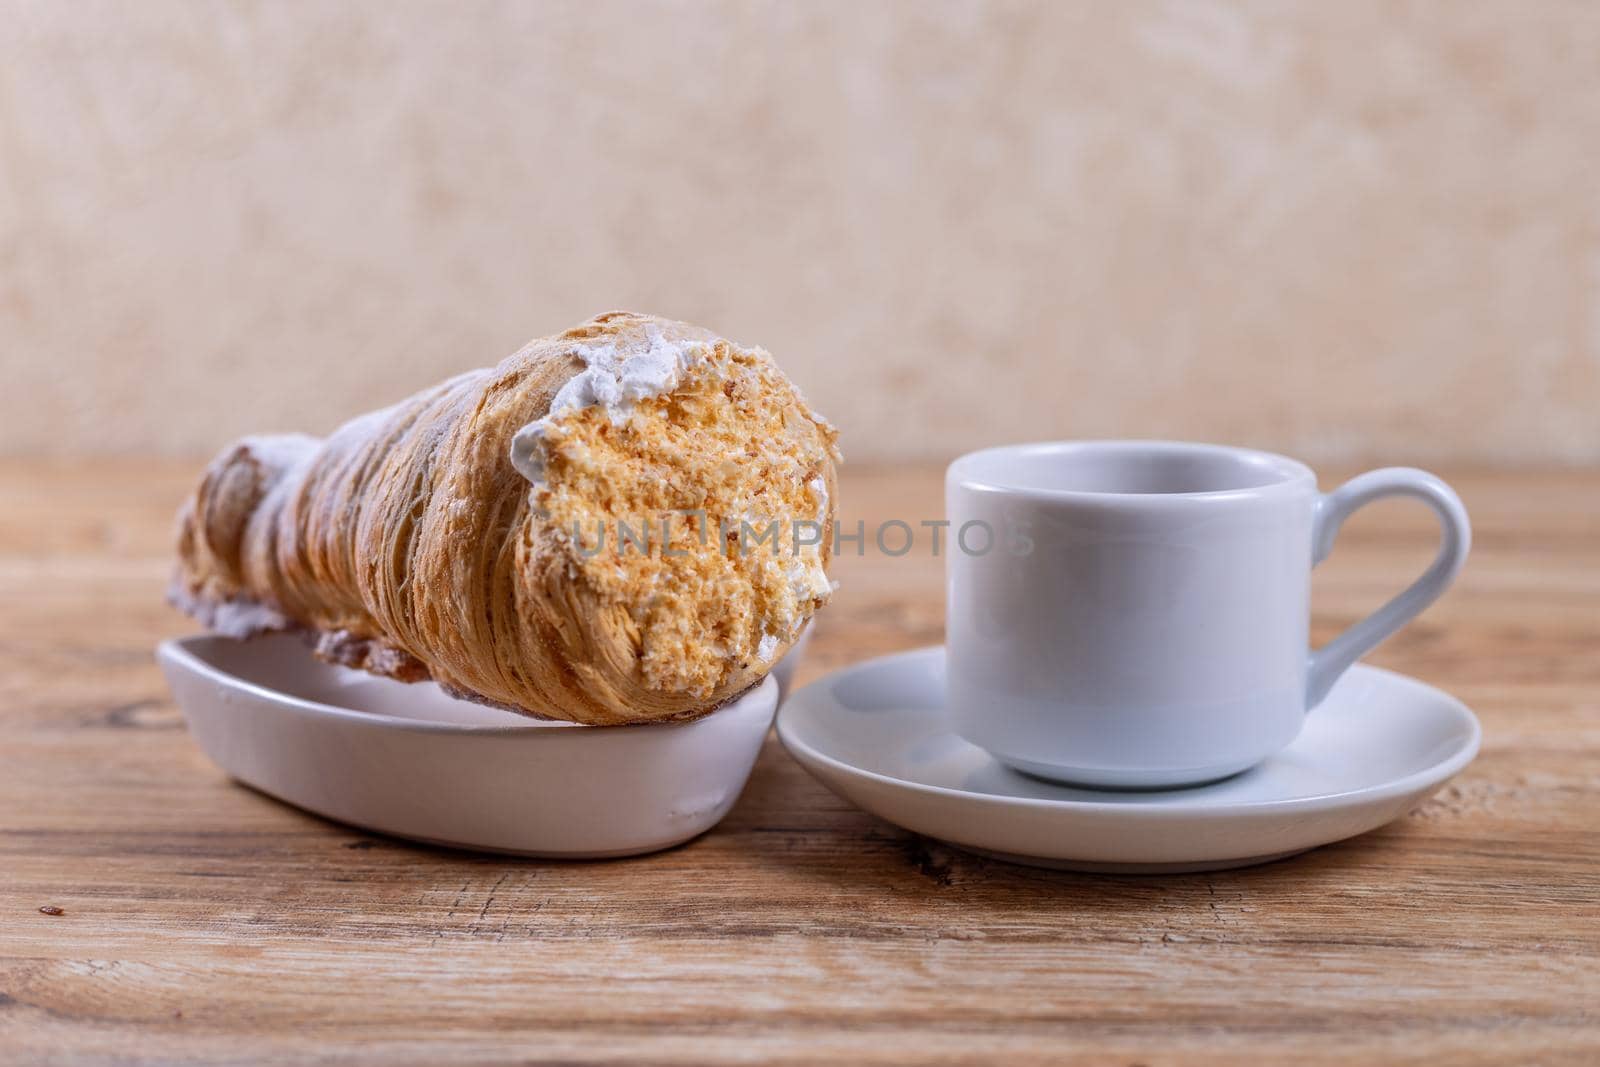  A cup of coffee next to delicious aromatic puff pastry cone with protein cream by galinasharapova